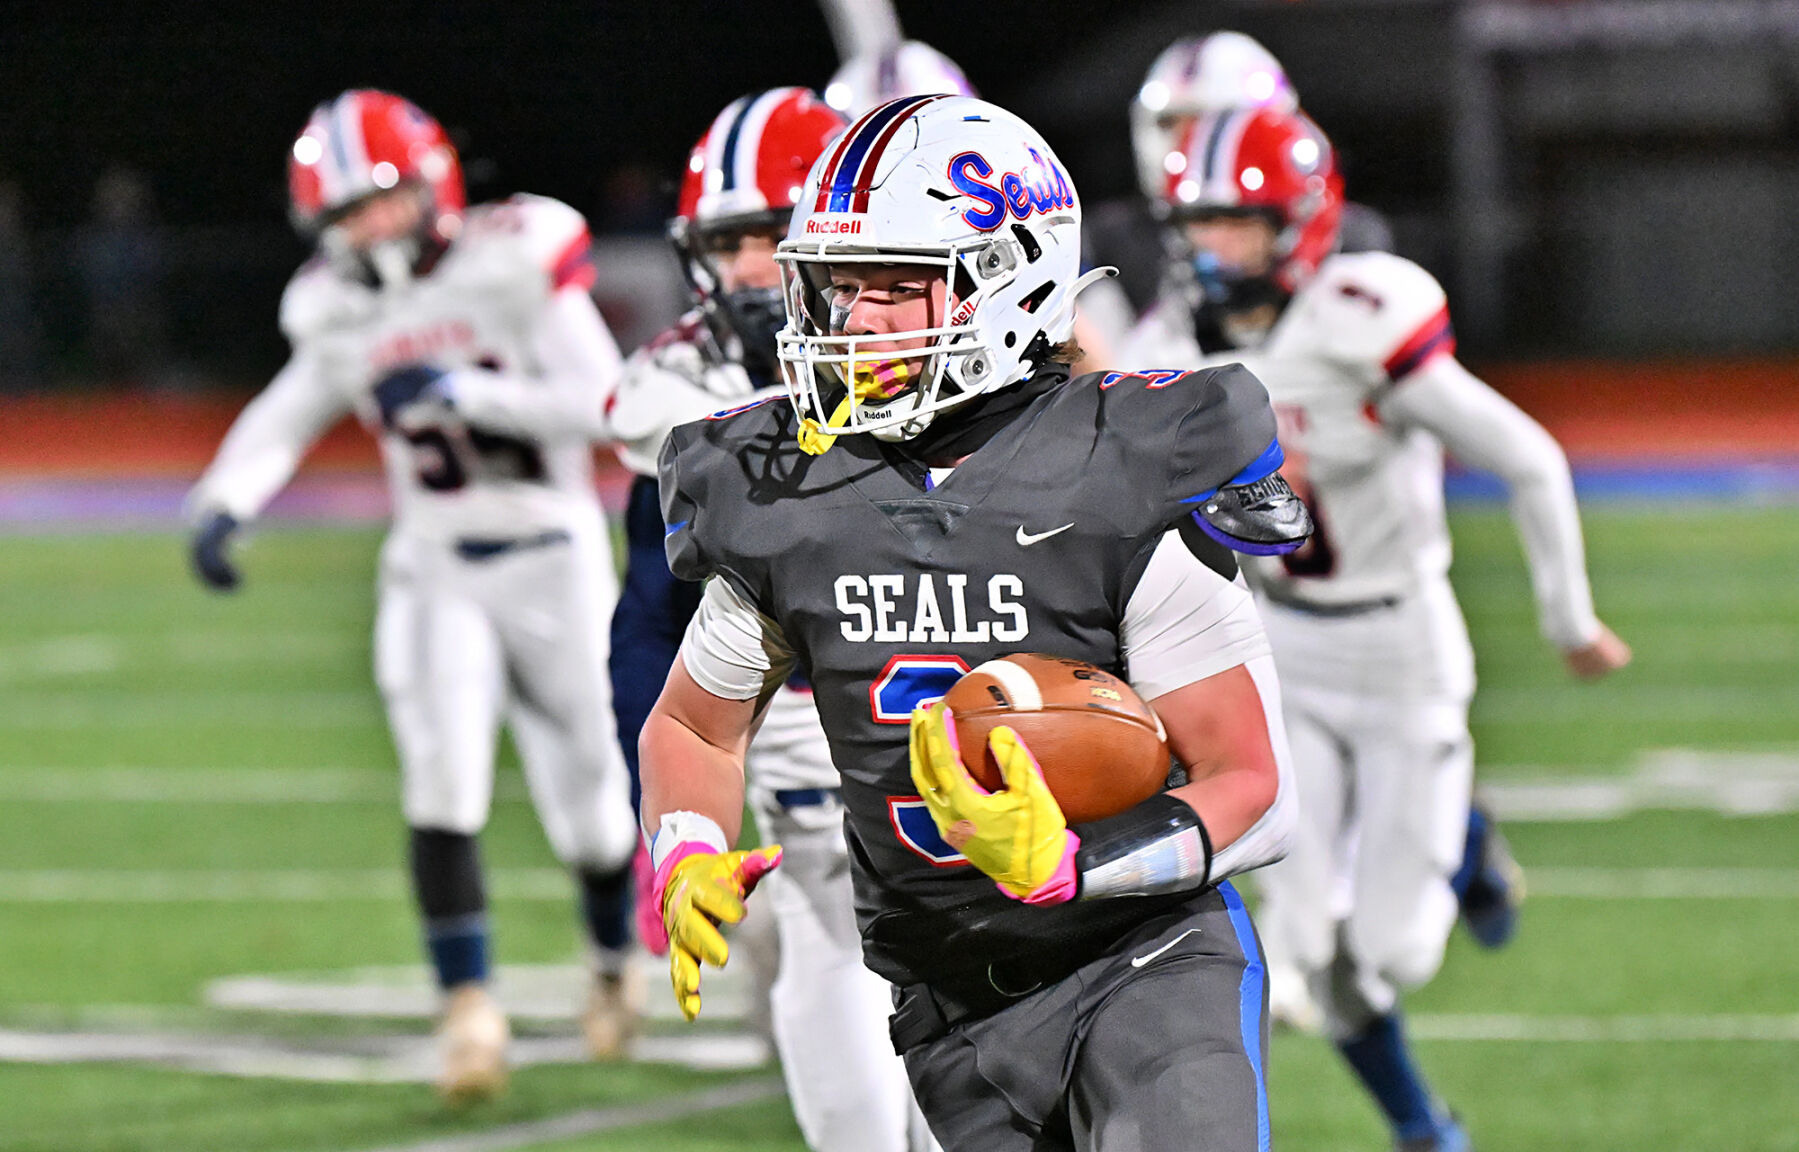 Tucker Teats Leads 4A All-State Football Team with Record-Setting Performance